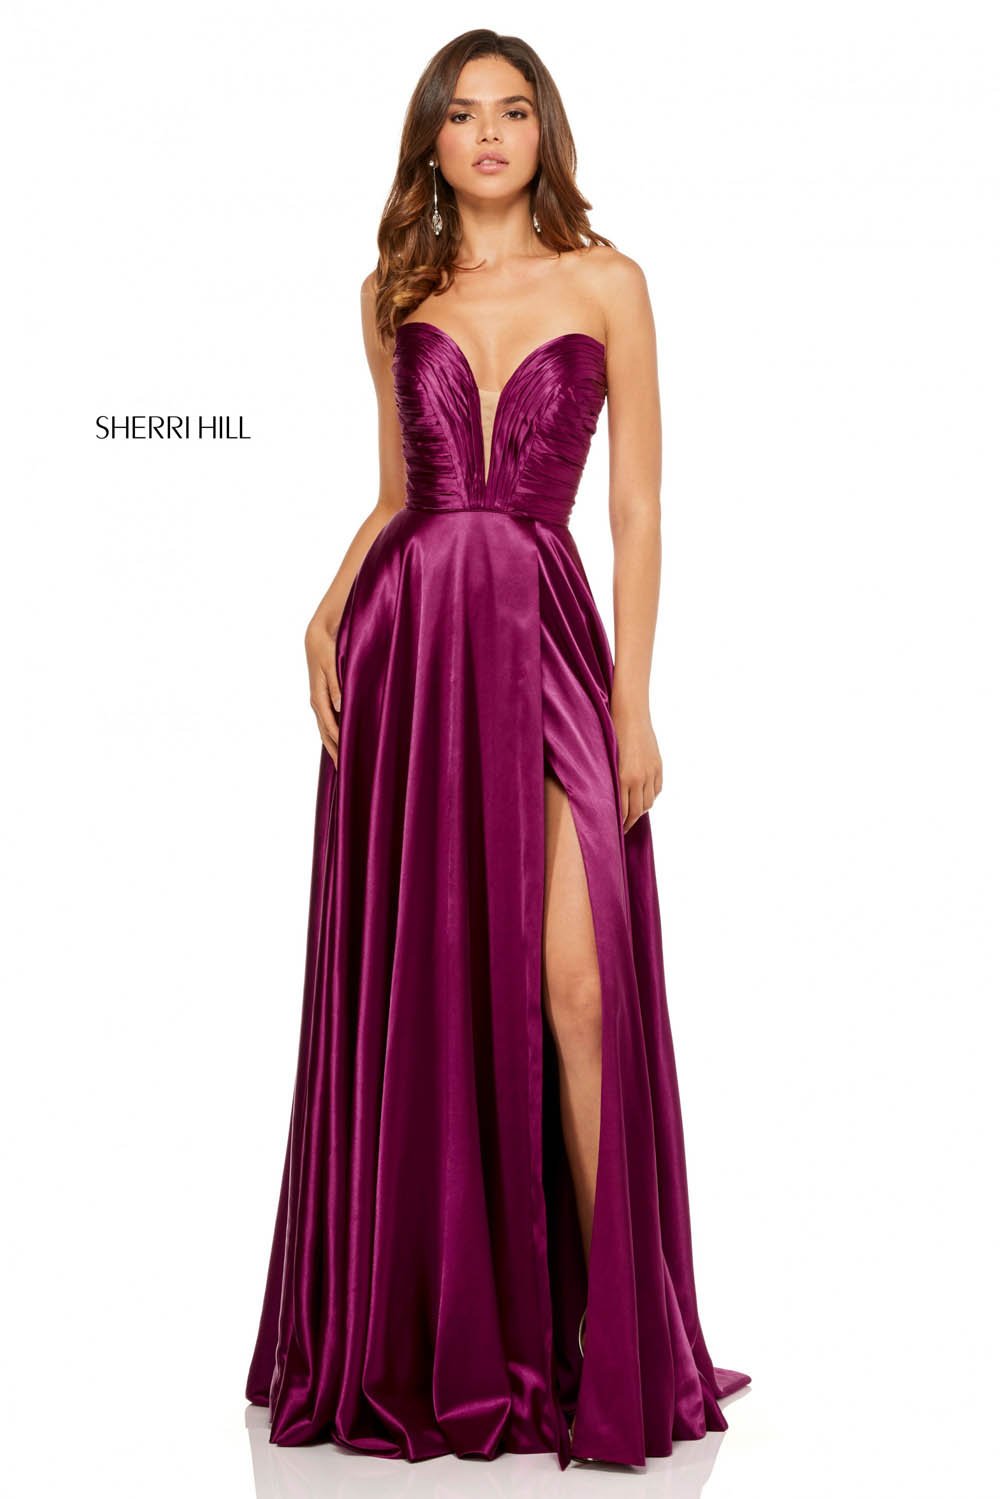 Sherri Hill 52569 dress images in these colors: Red, Emerald, Royal, Purple, Plum, Wine.